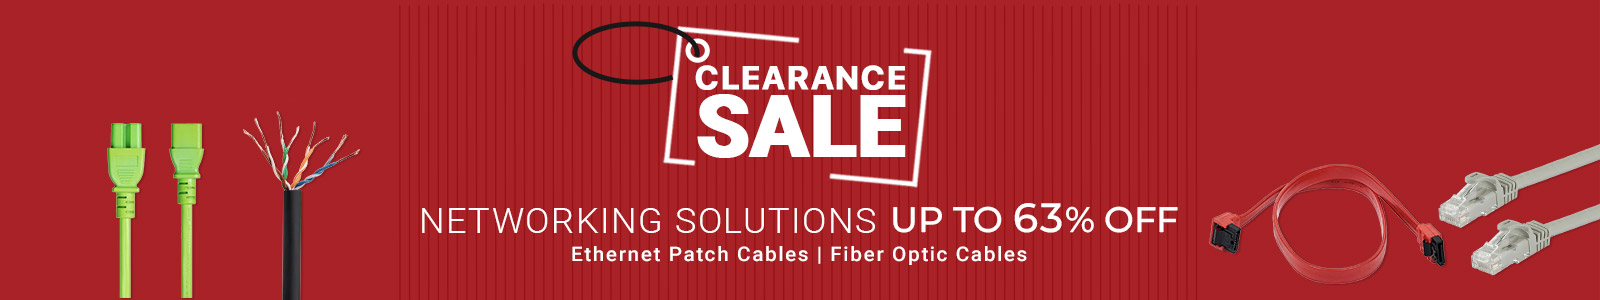 Clearance Sale
Networking Solutions 
Up to 63% off
Ethernet Patch Cables | Fiber Optic Cables
Shop Now